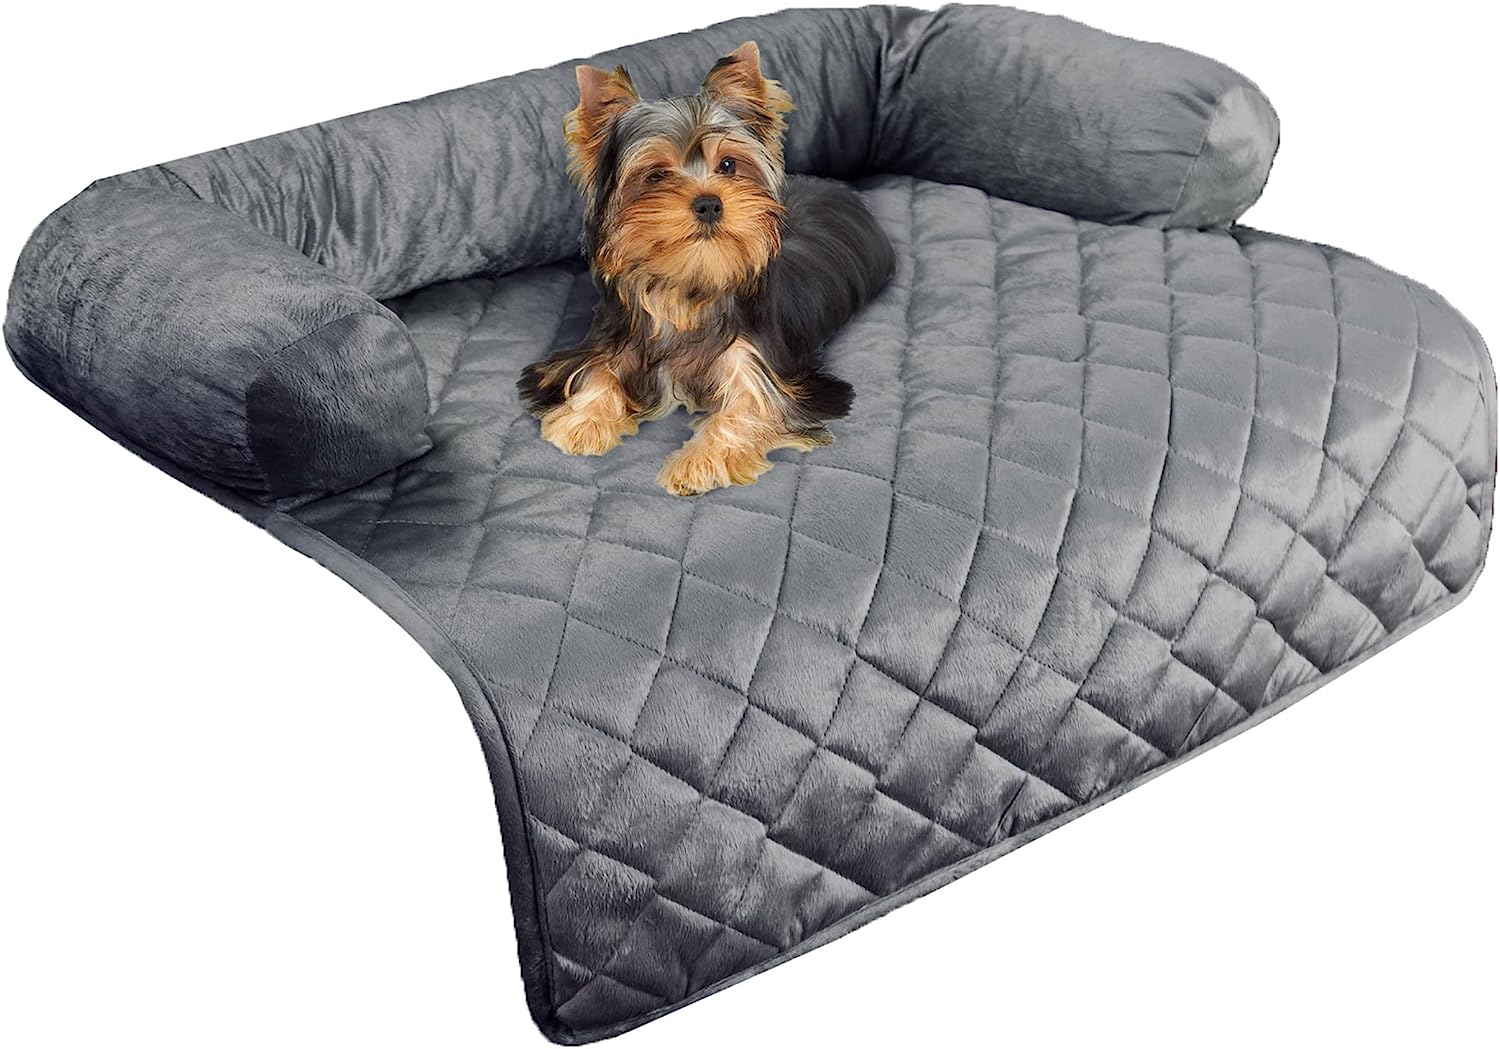 PETMAKER Furniture Protector Pet Cover for Dogs and [...]